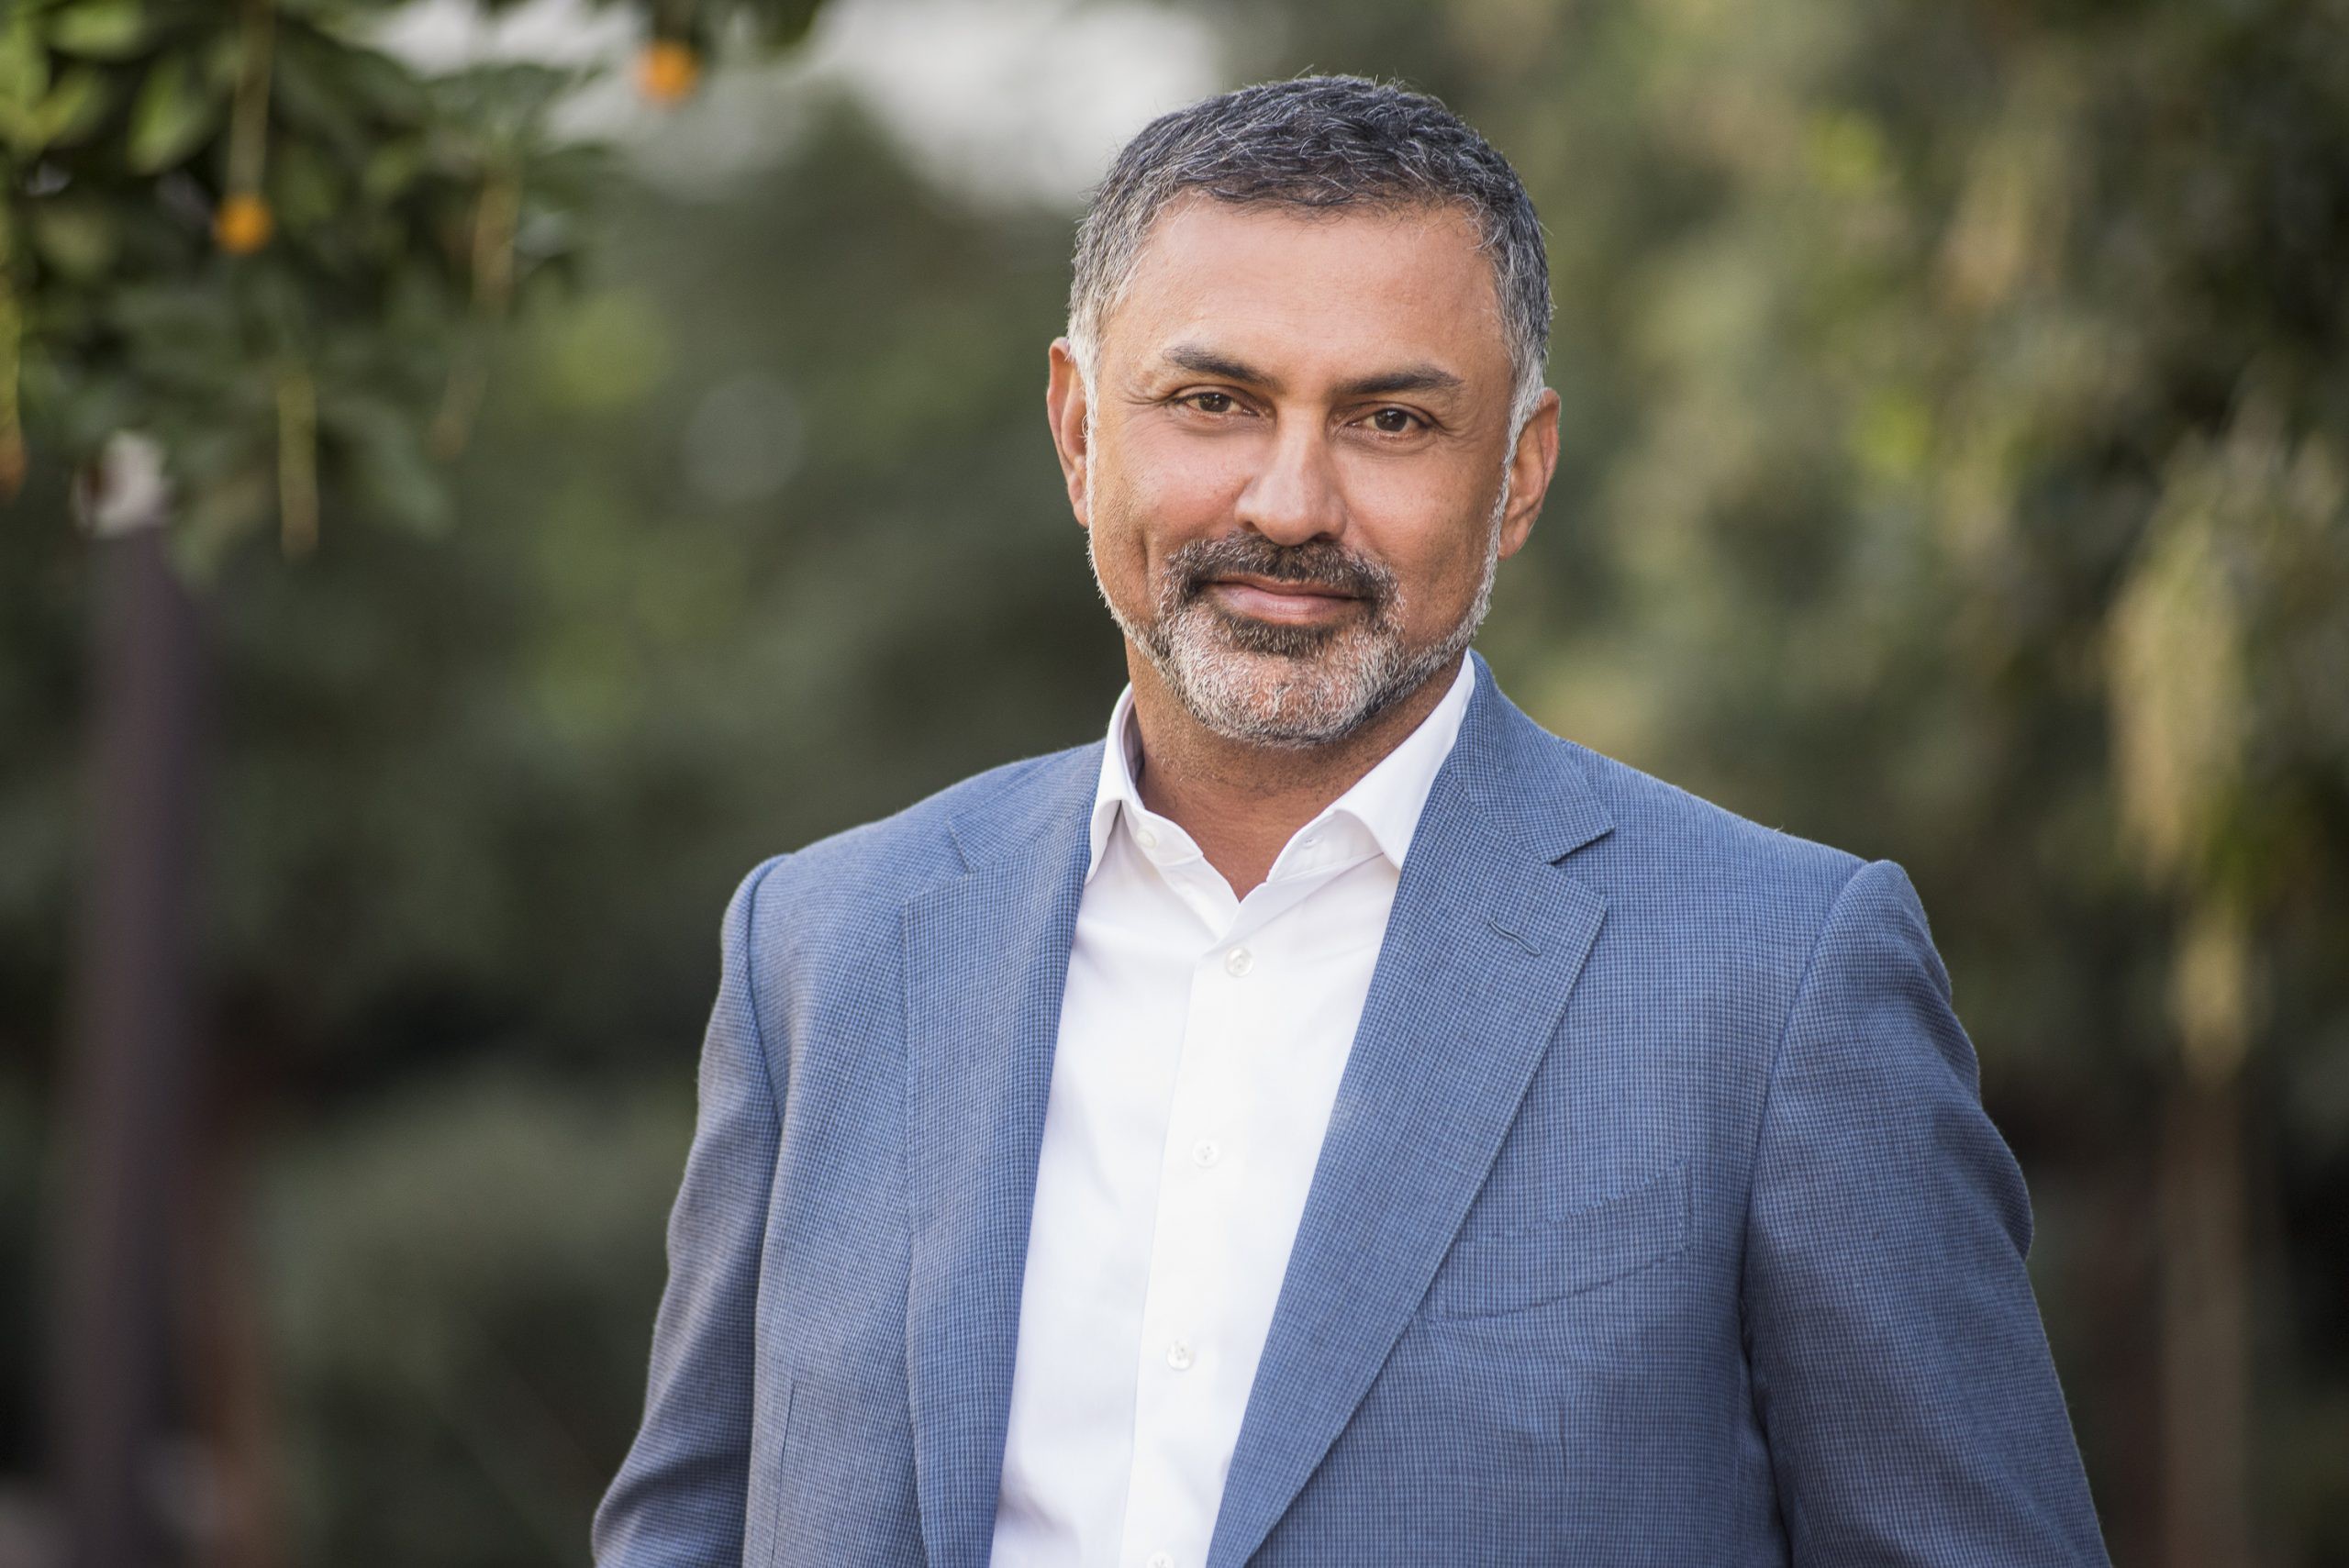 Nikesh Arora: A Story of Risk and Resilience